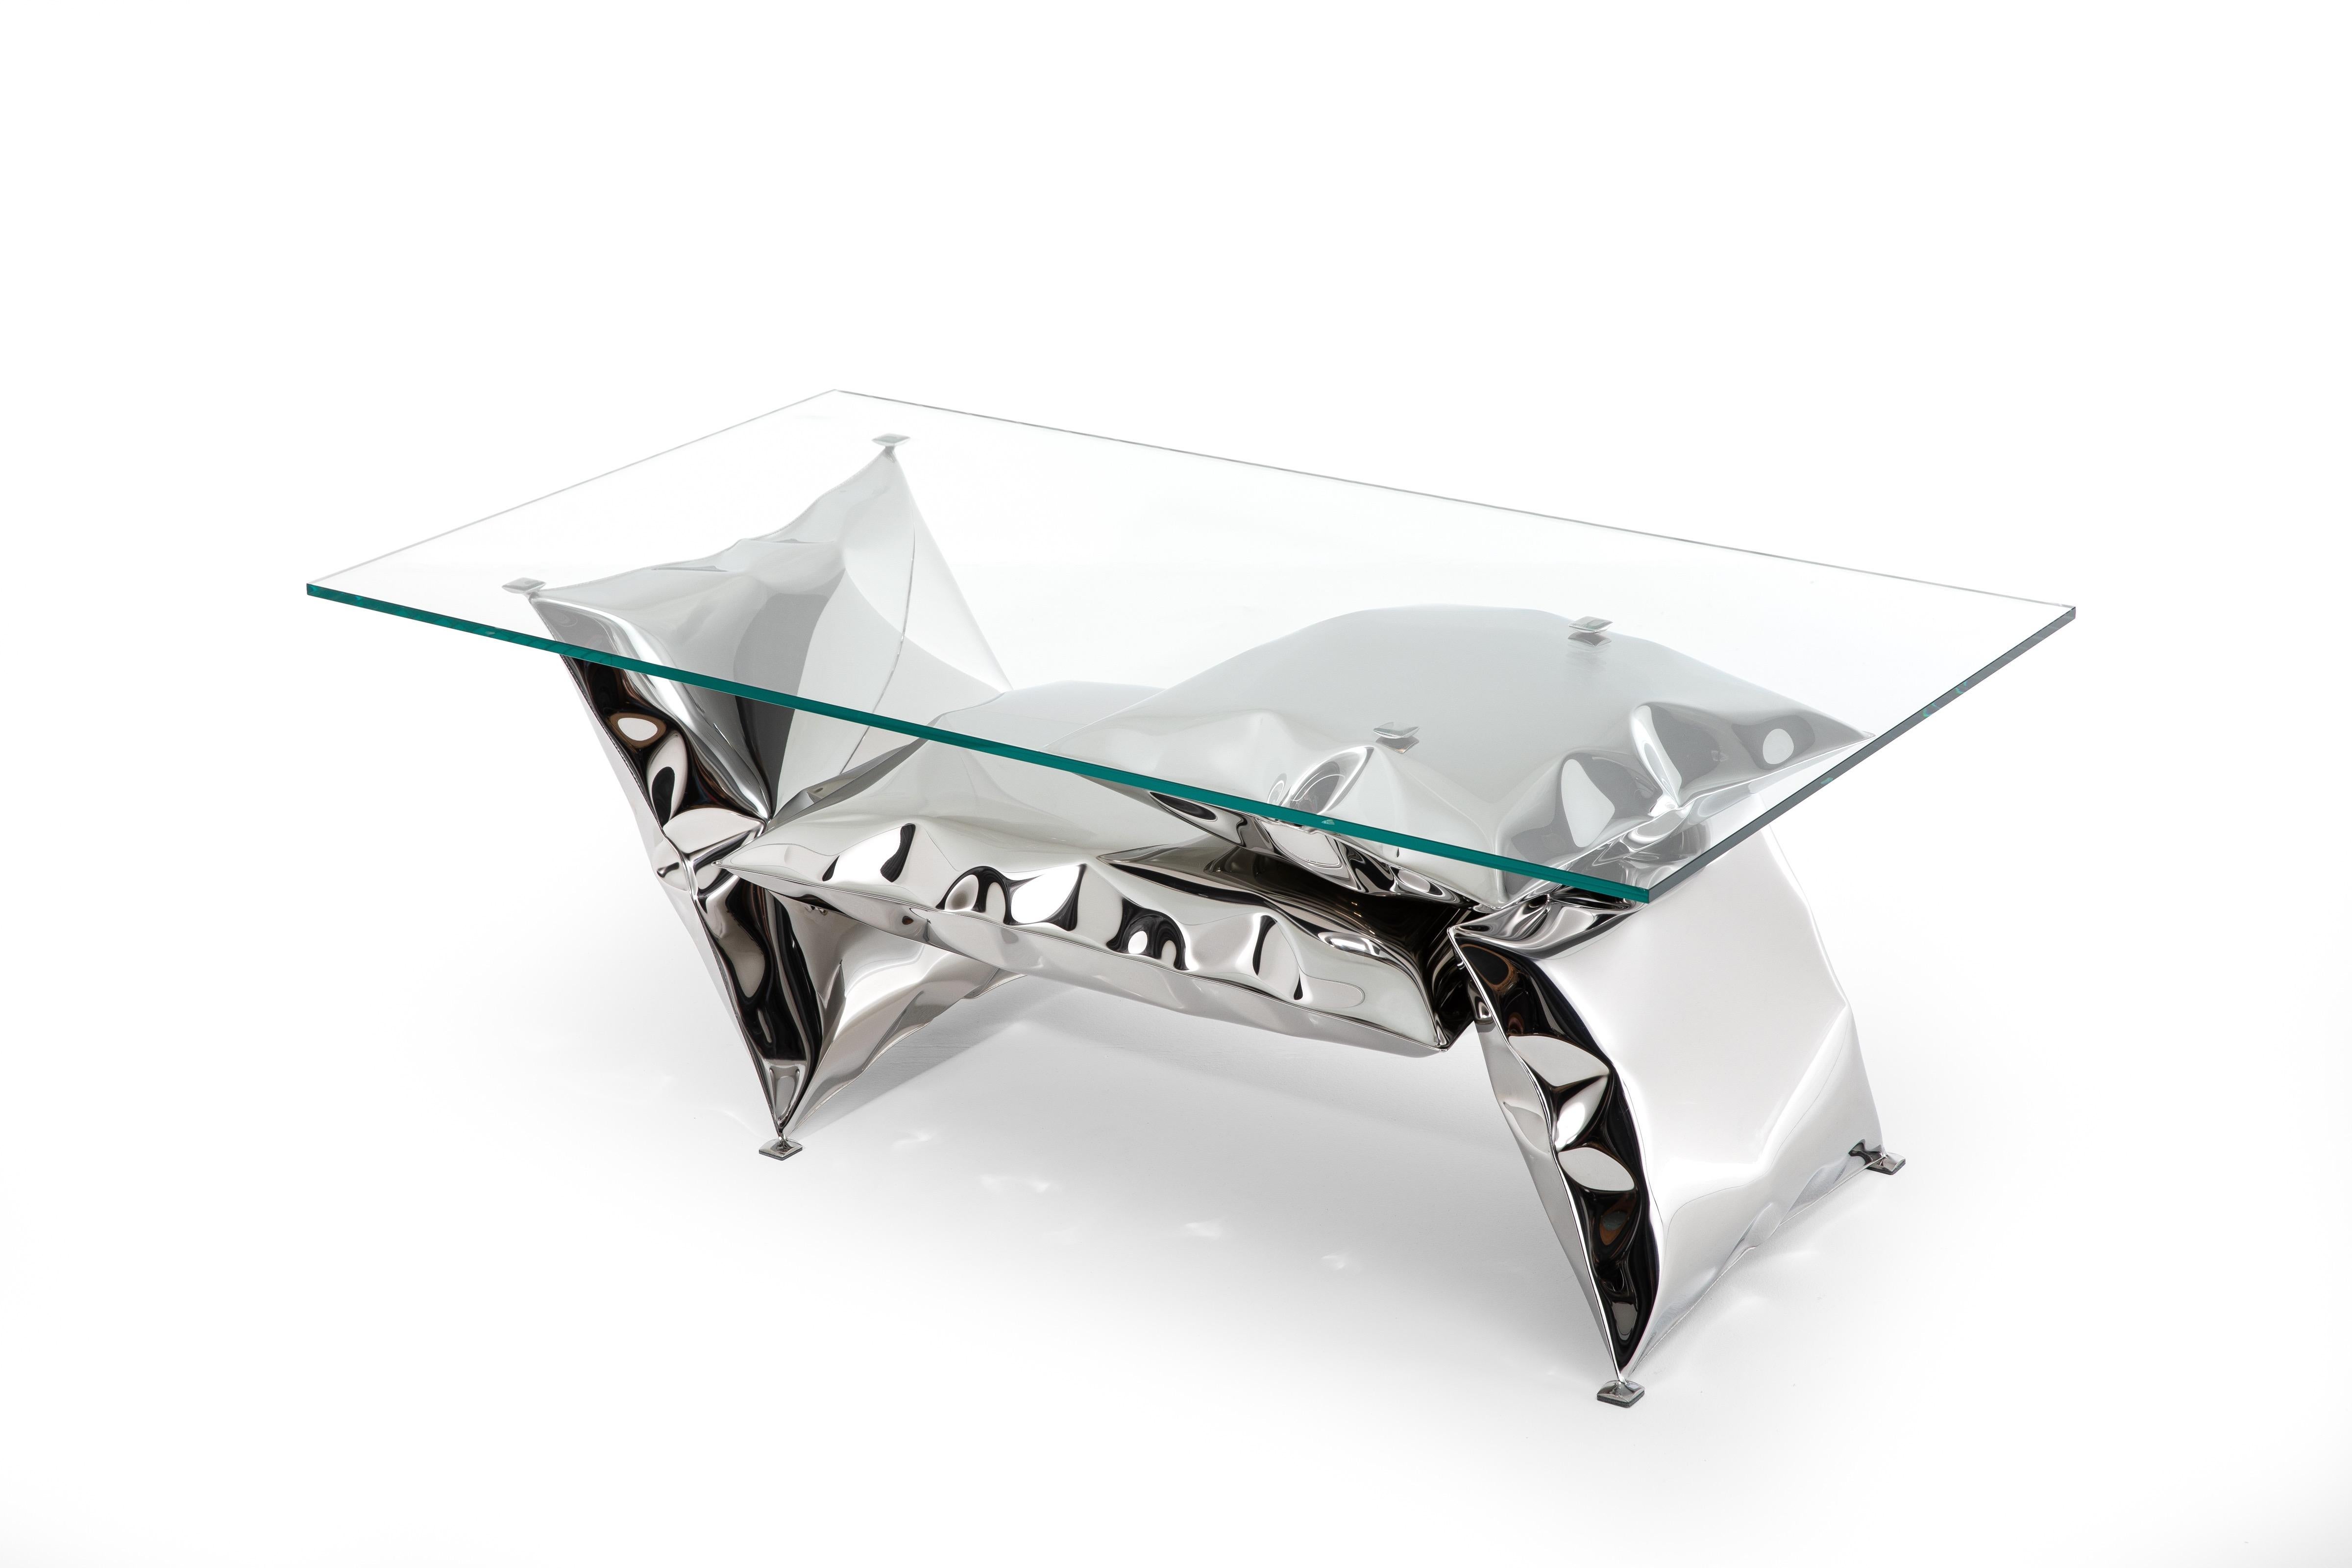 Inflated metal coffee table. Highly mirror polished stainless steel and 10mm toughened glass with polished edges. 
Each table is hand made, numbered and signed in the UK with each table differing from the previous. All welds are blended and polished